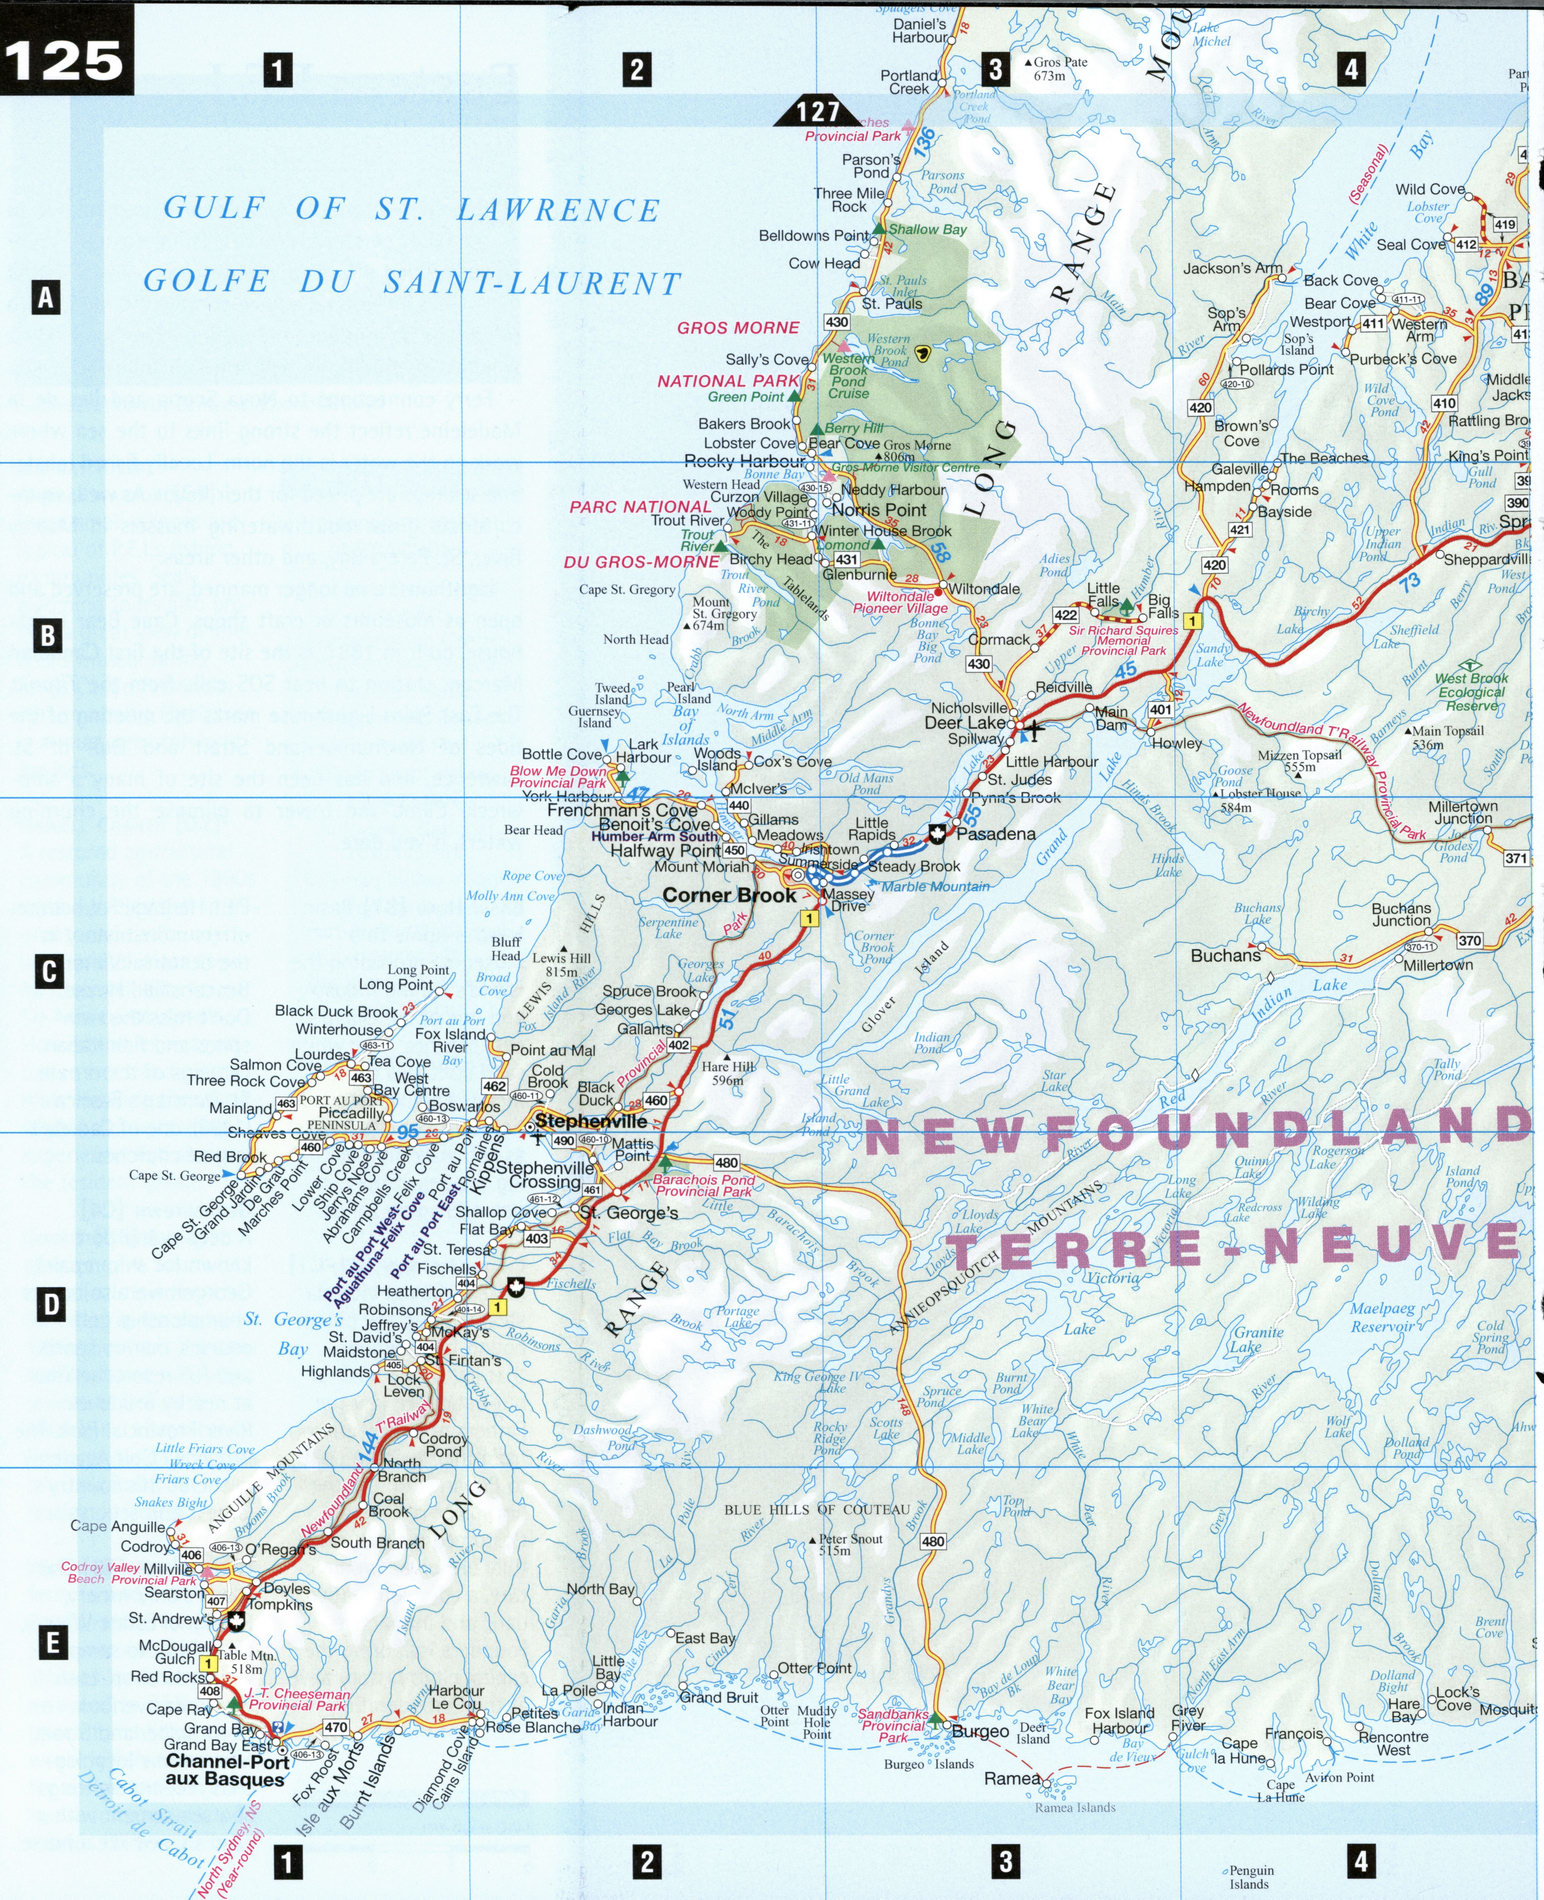 Detailed map of Central Newfoundland